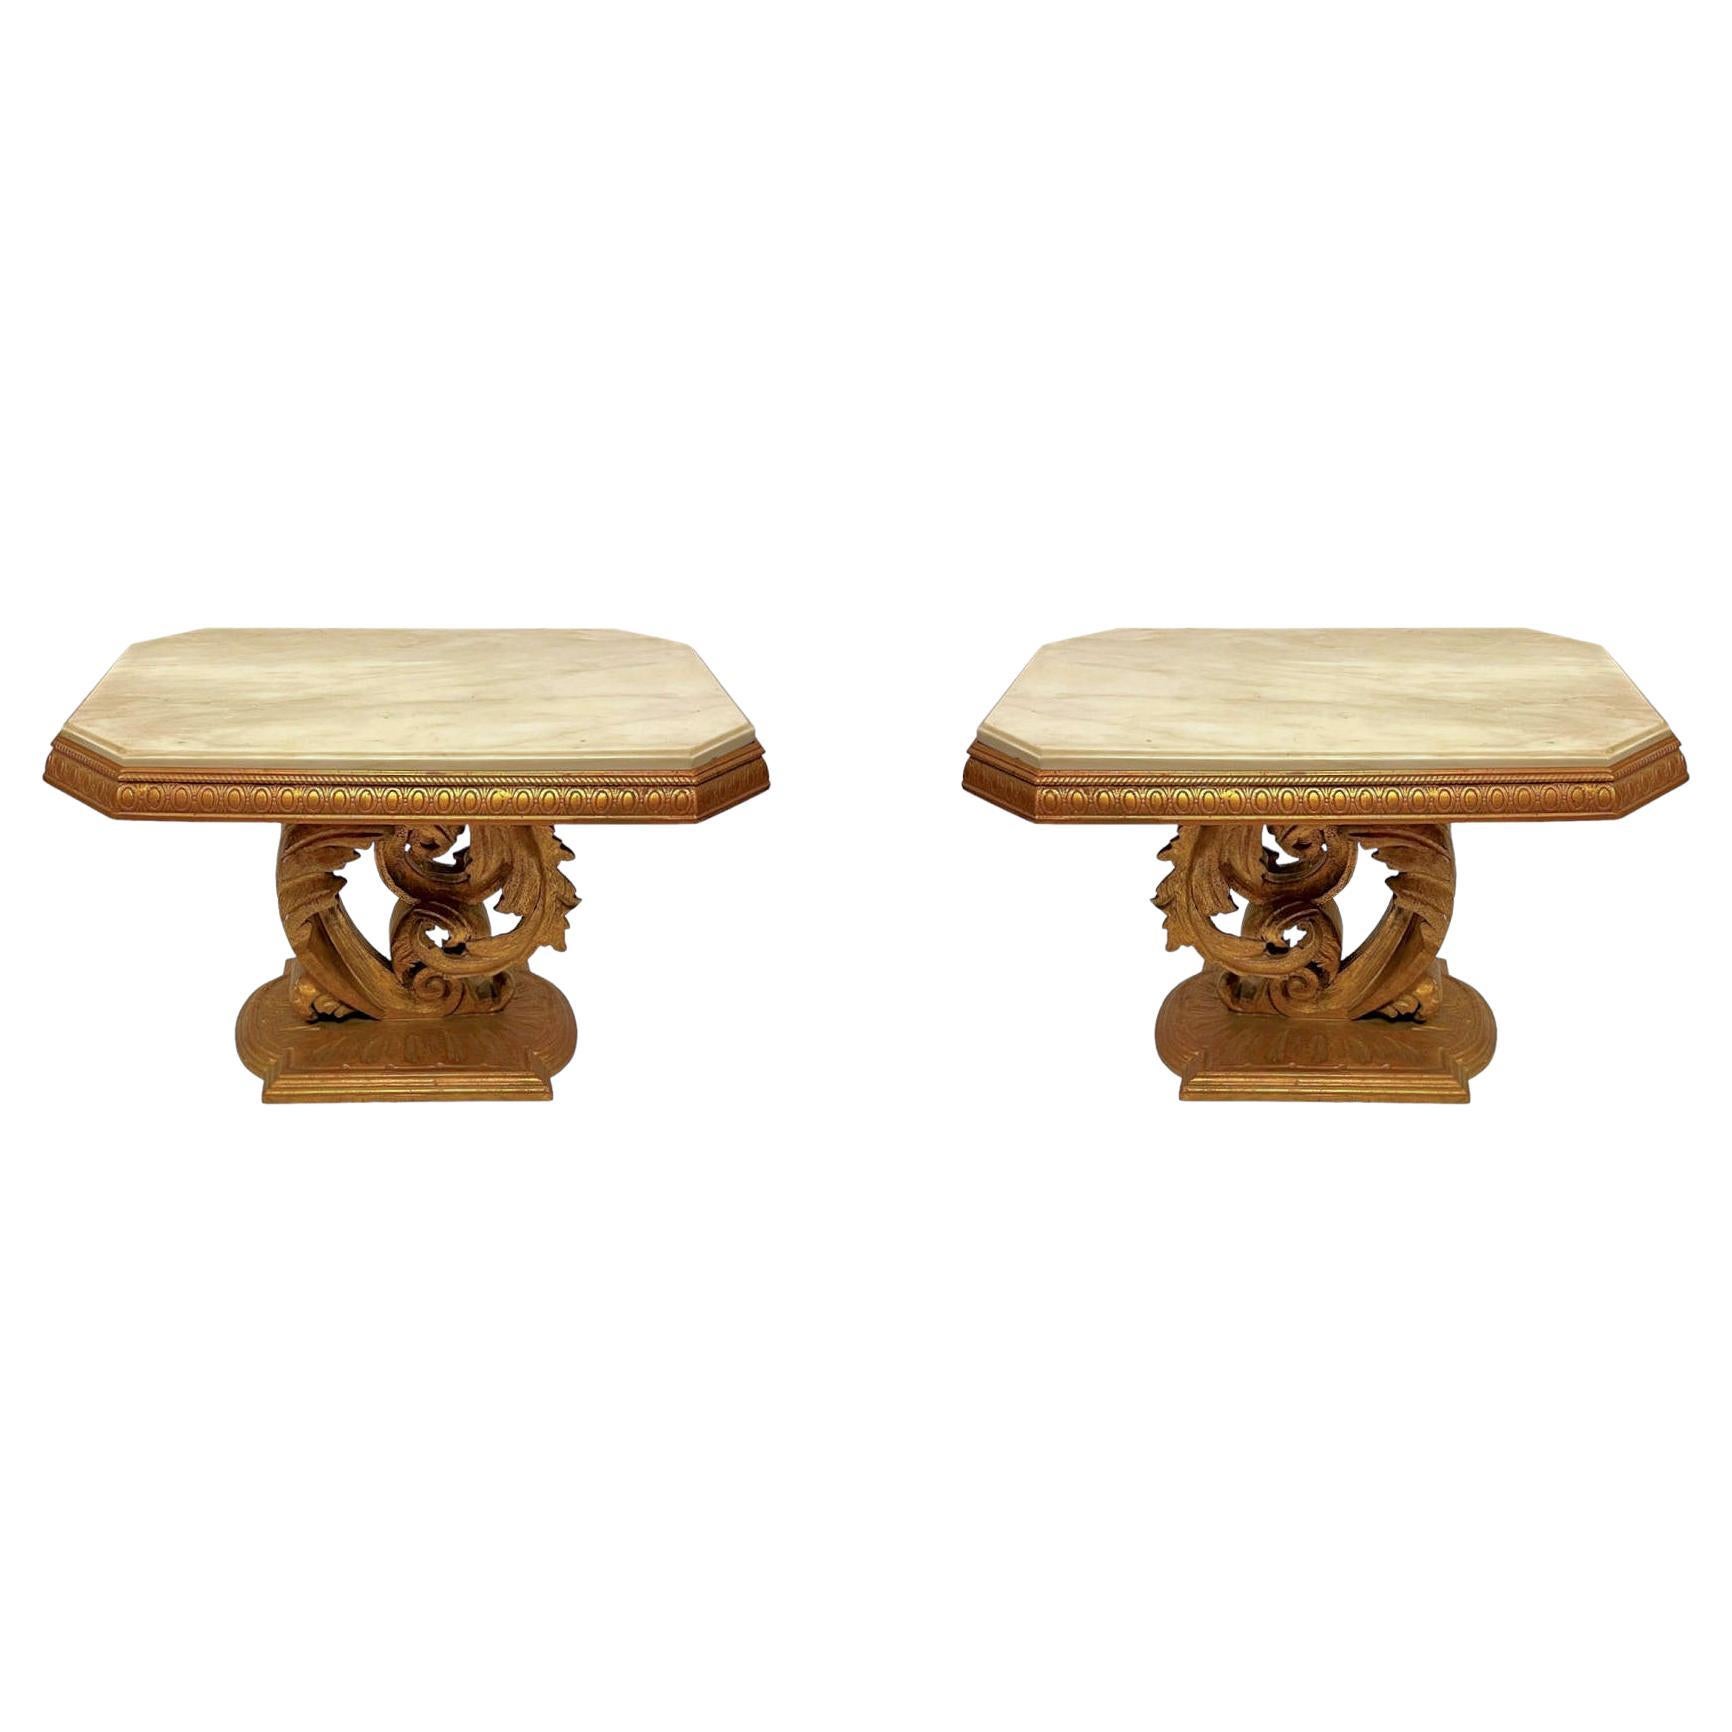 Pair Roccoco Style Carved Giltwood Pedestal Side Tables with White Marble Tops